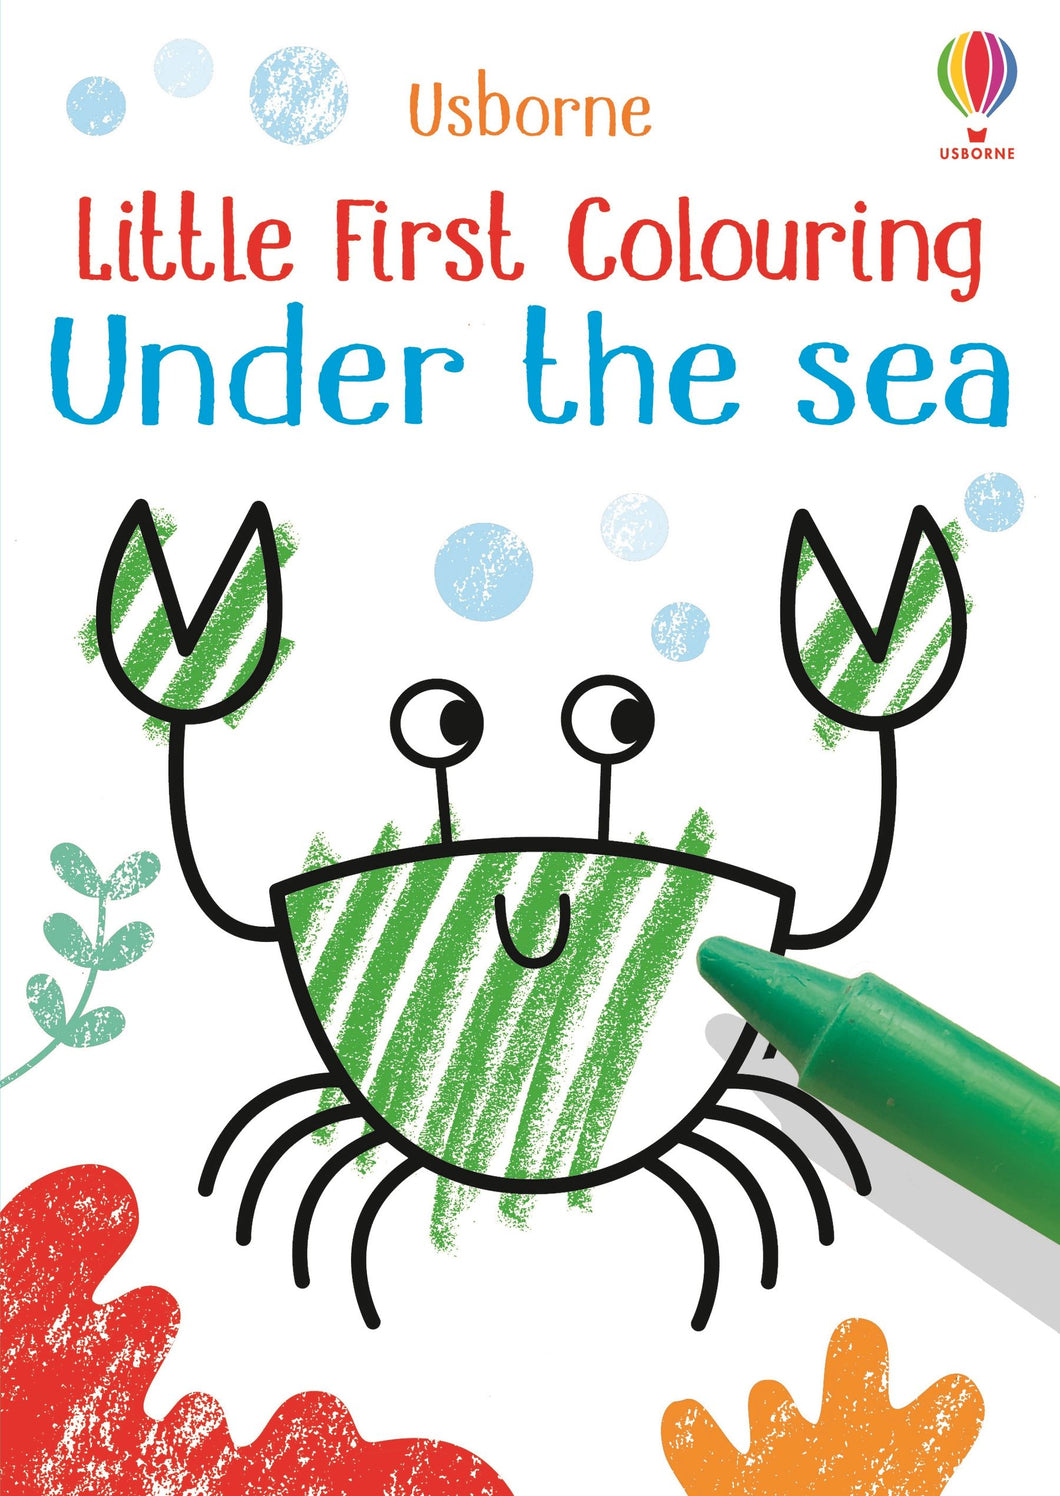 Under the Sea - Little First Colouring Book